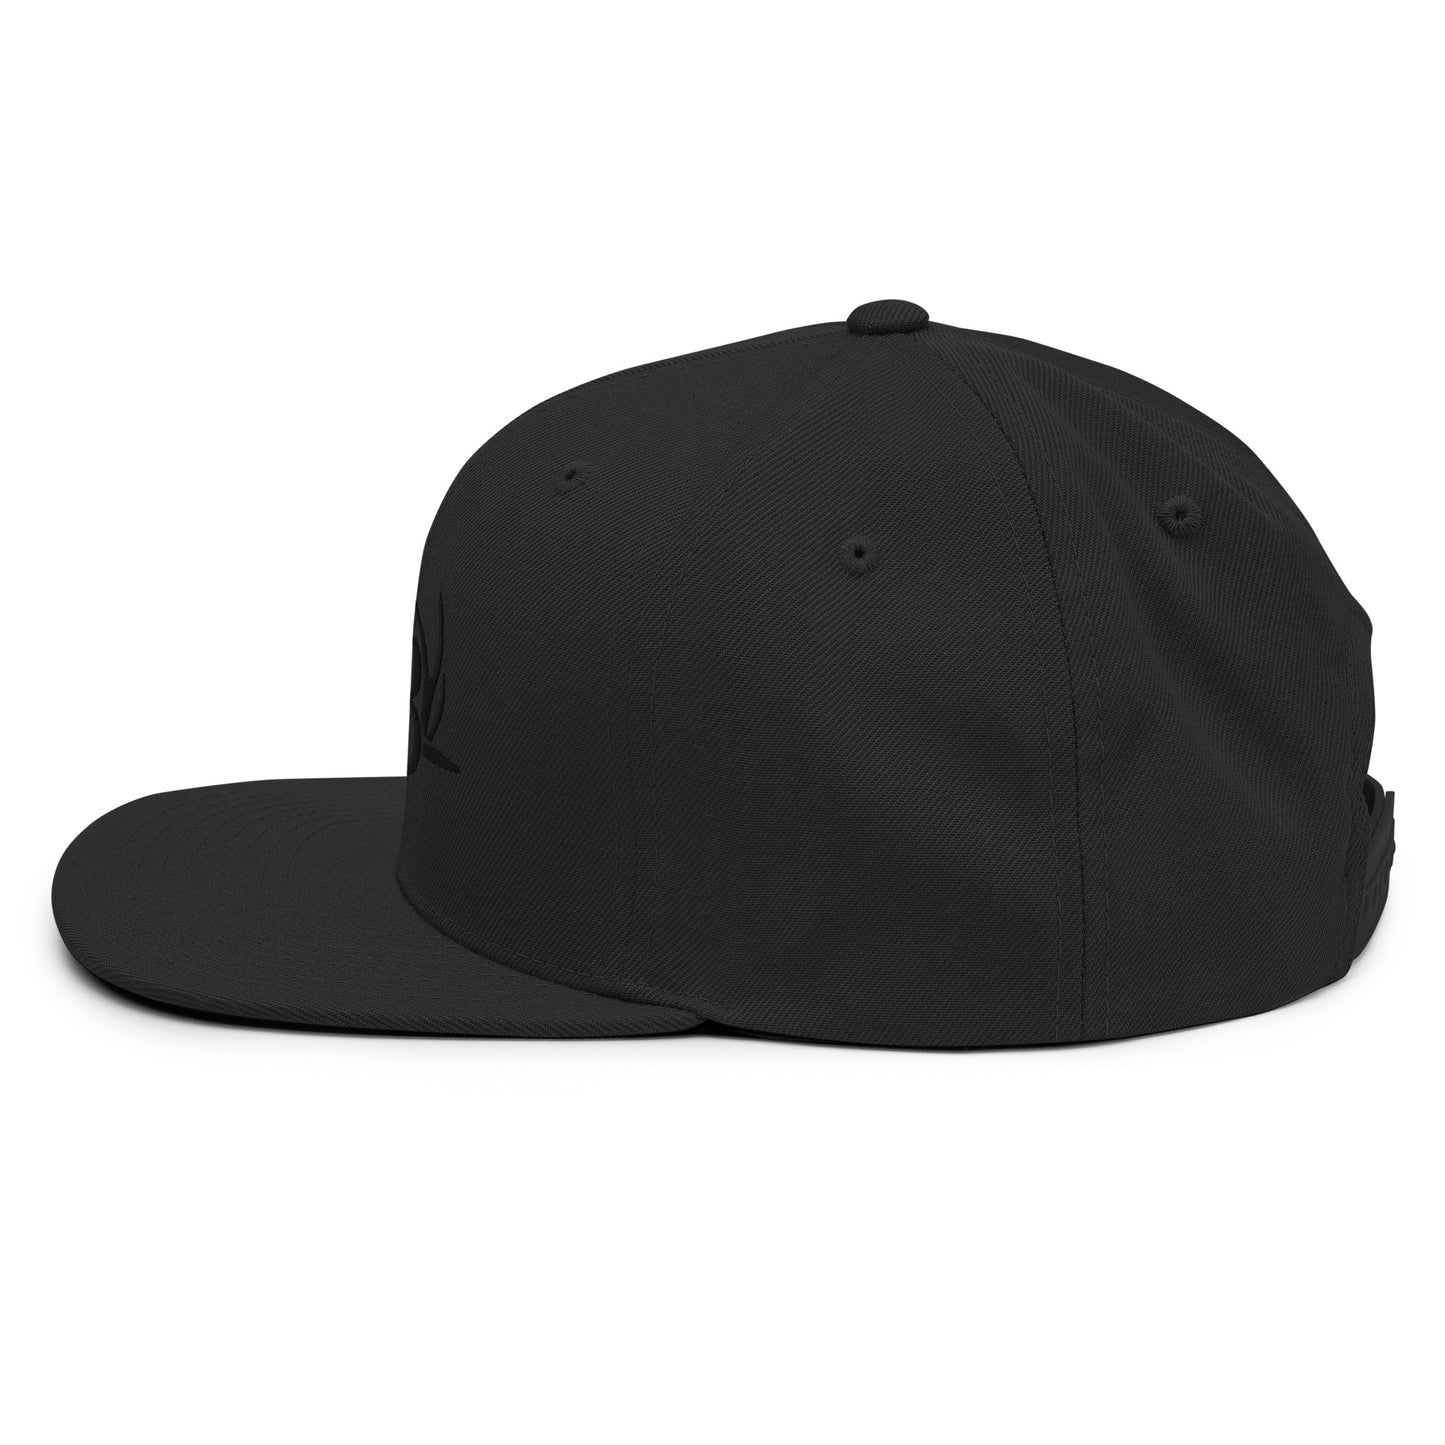 BLACKED OUT Snapback Hat